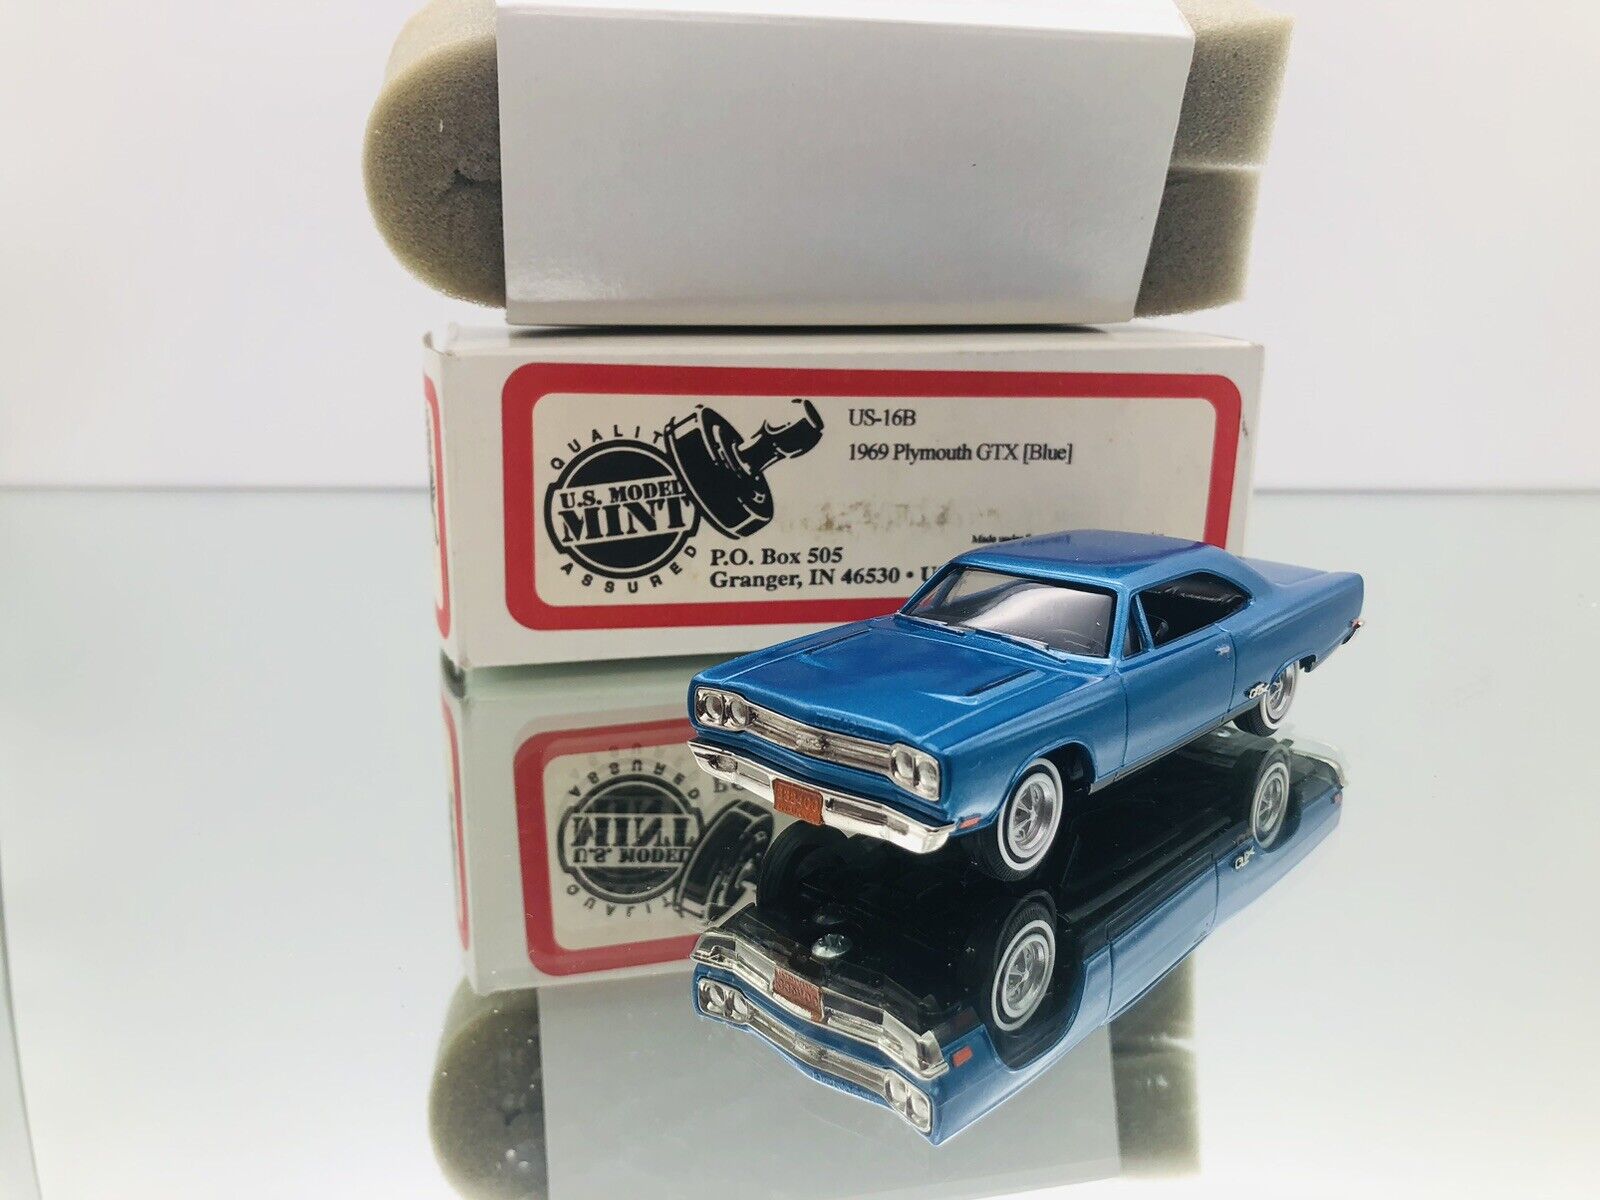 US MODEL MINT 1969 PLYMOUTH GTX 1:43 LNIB SOLD PREOWNED DUE TO HIGHLIGHTS